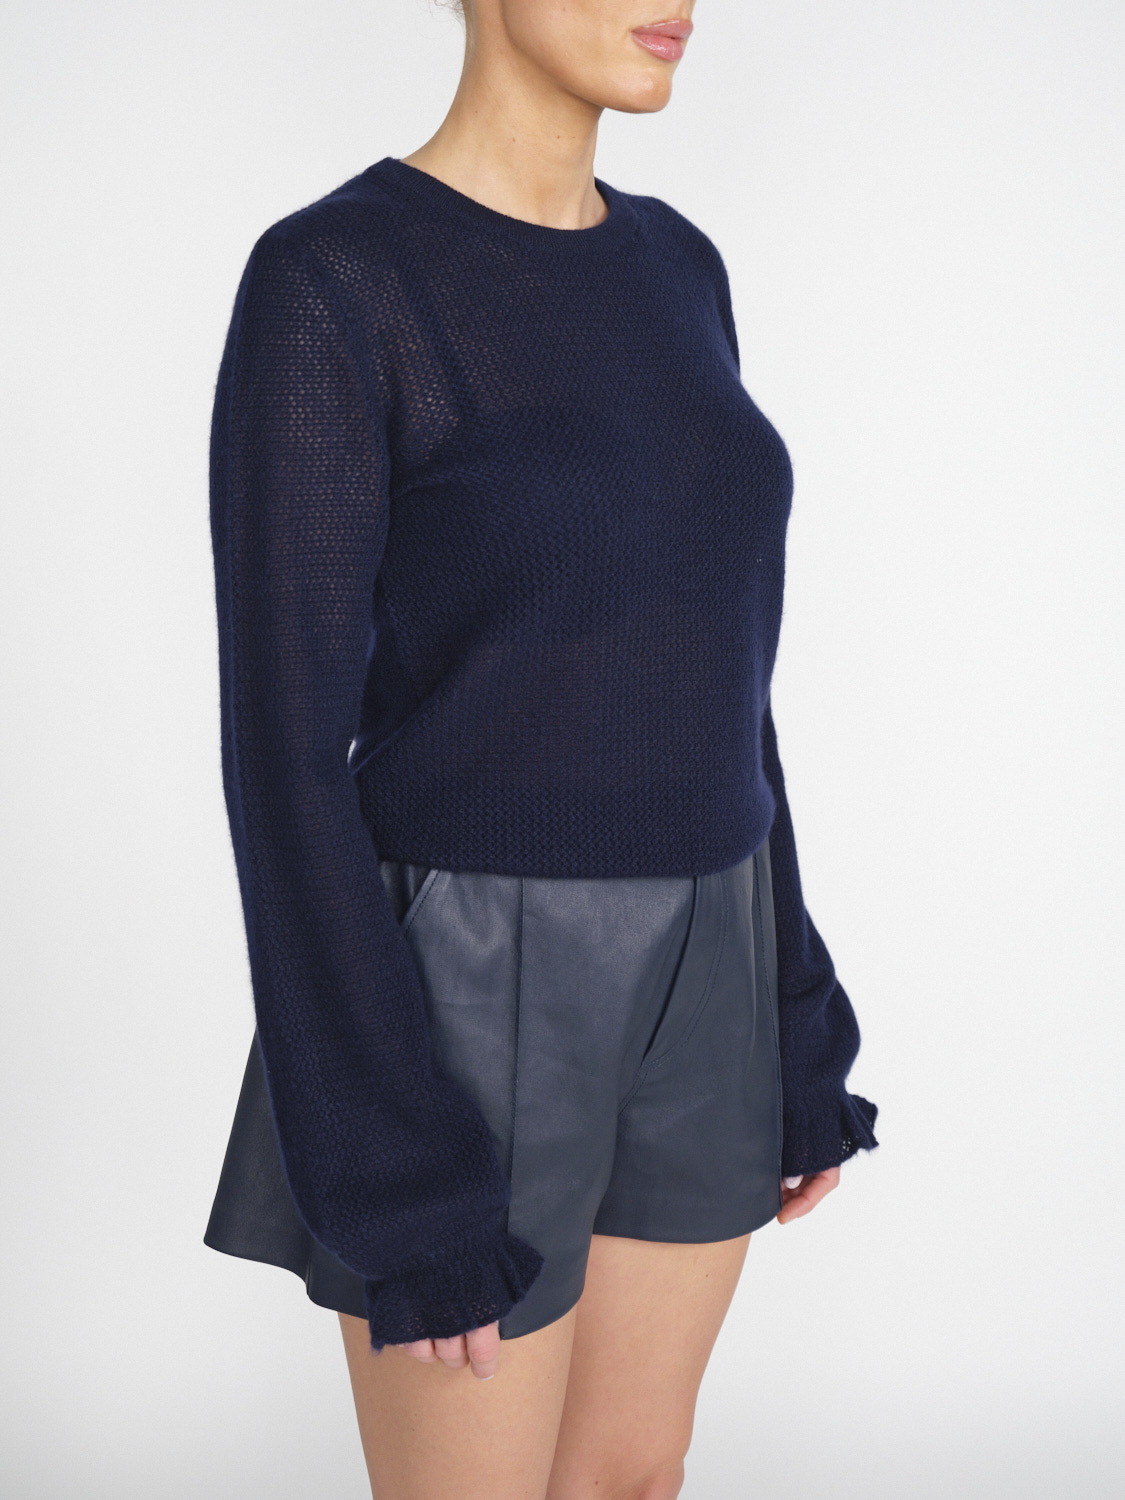 Lisa Yang Leanne - Maglia Ajour in cashmere  marine XS/S